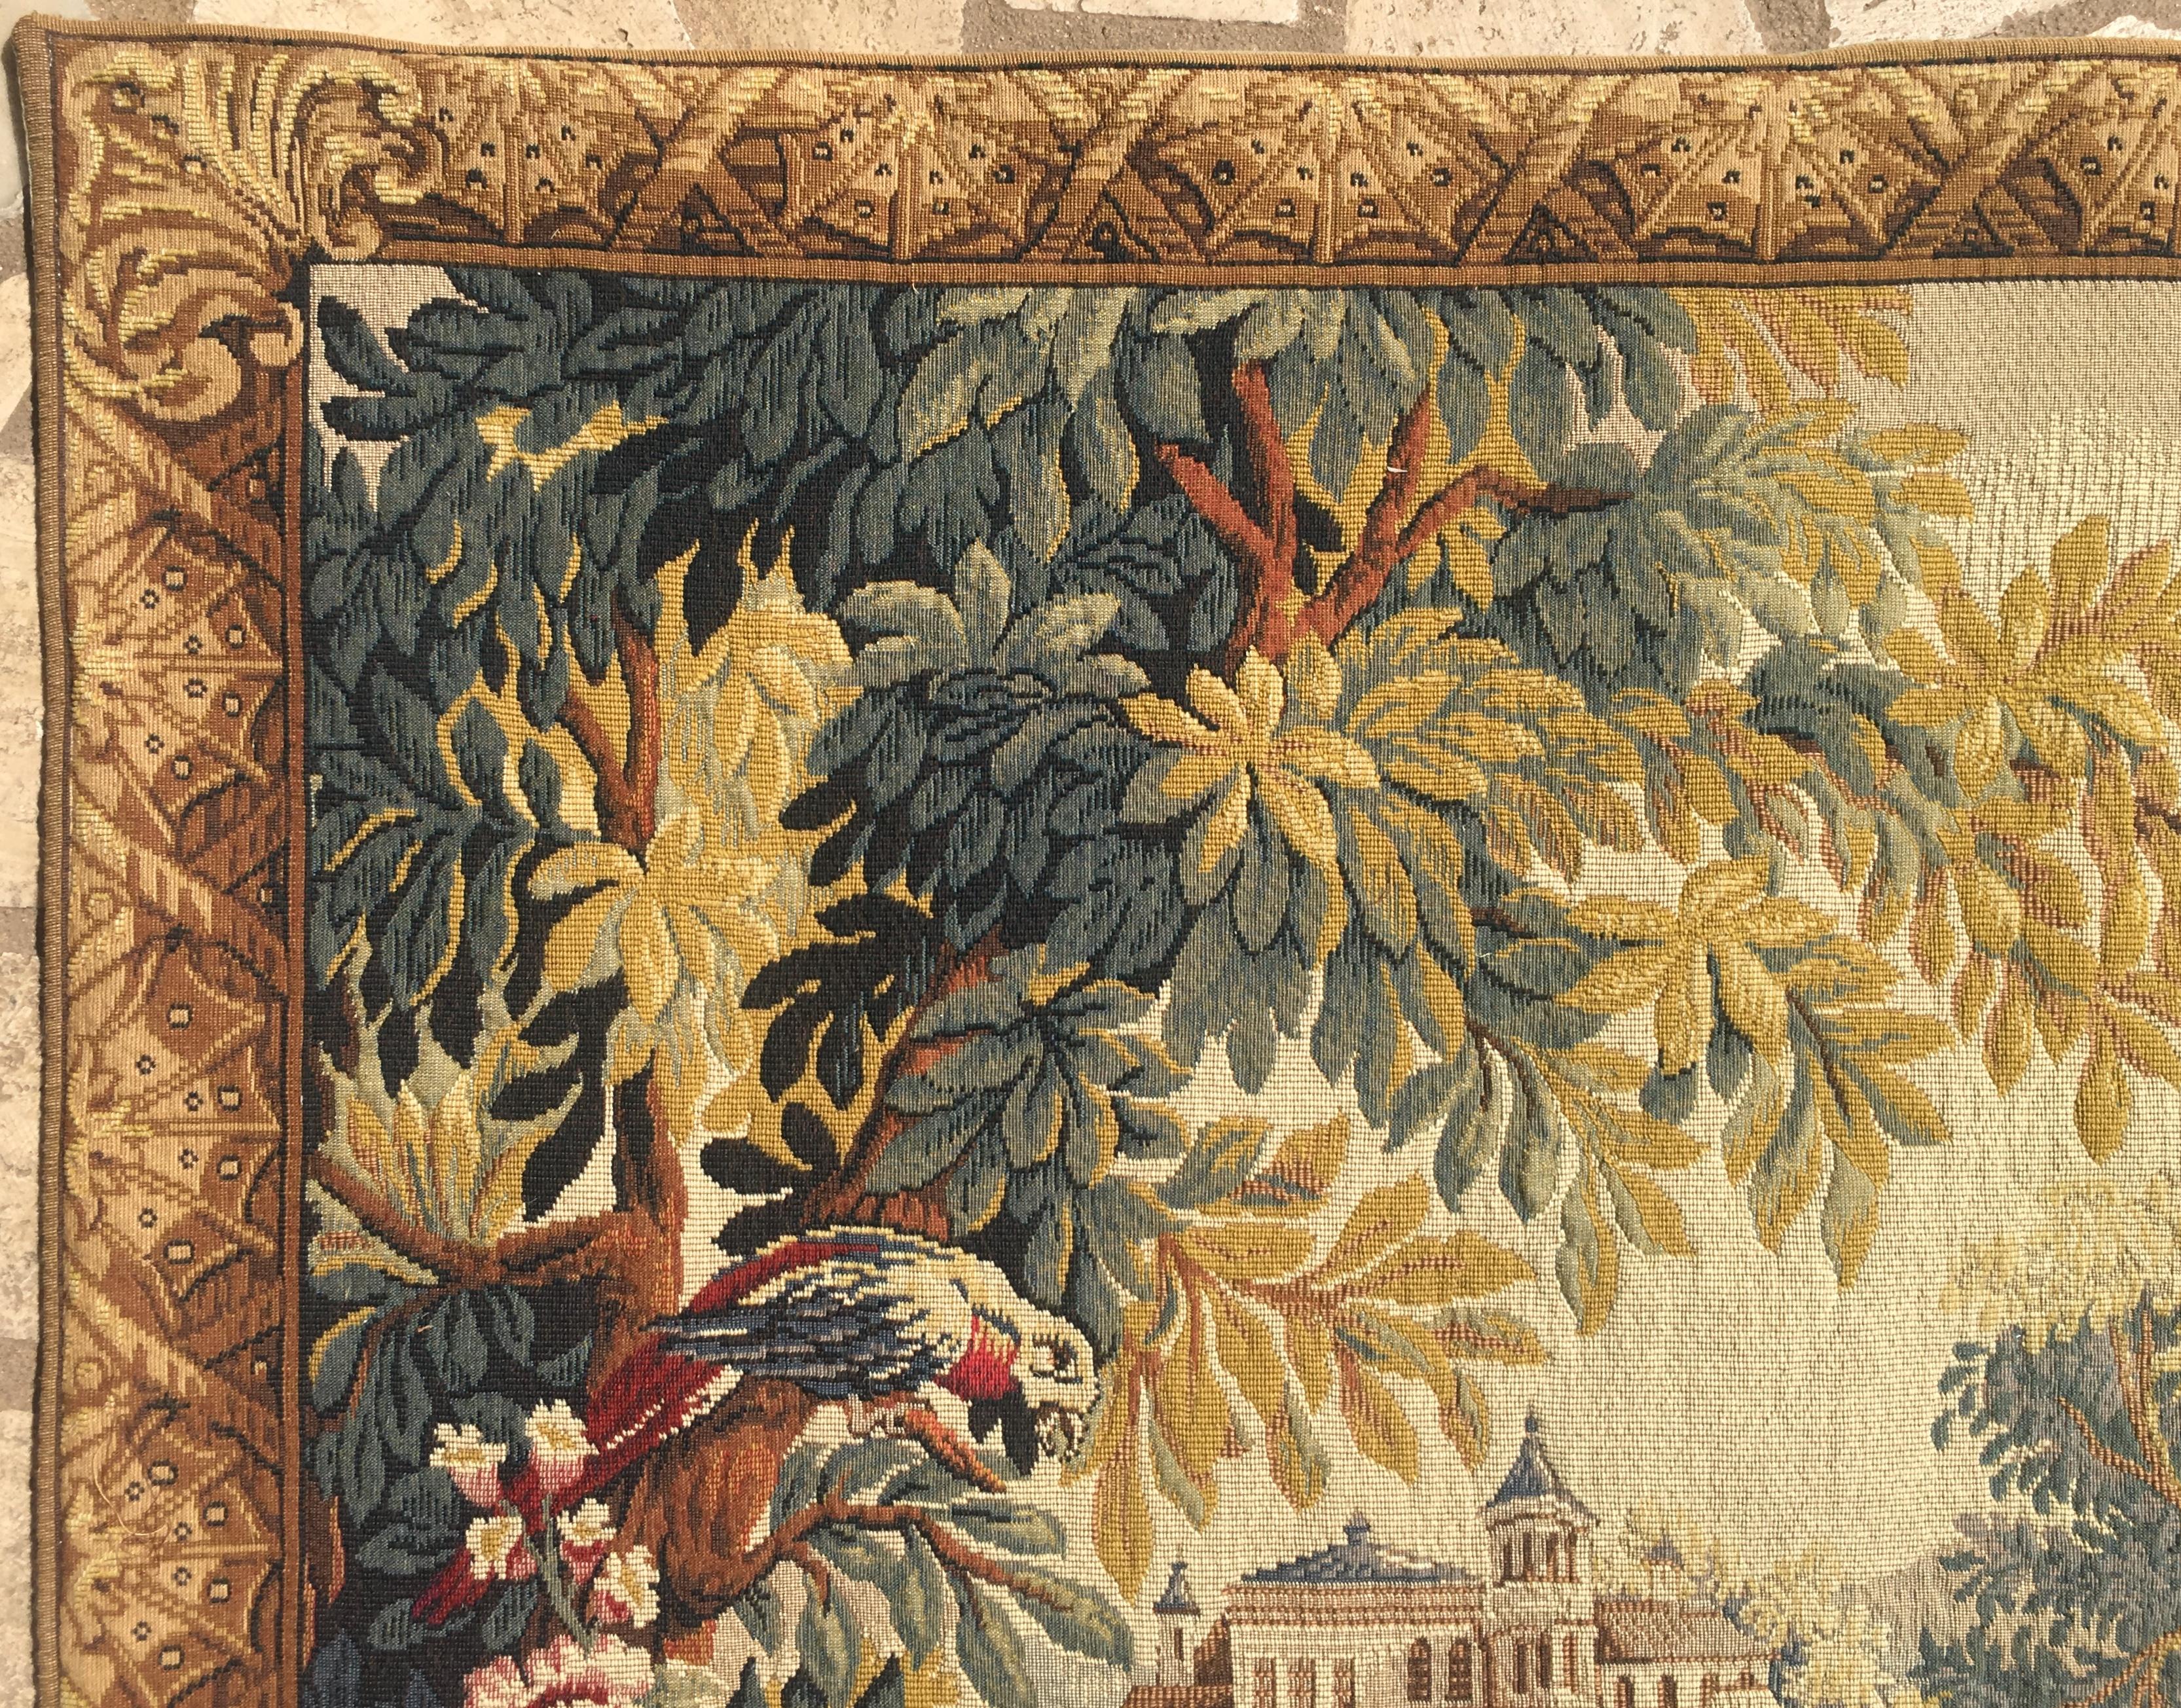 20th Century French Aubusson Style Tapestry with Castles, River, Ducks, and Foliage